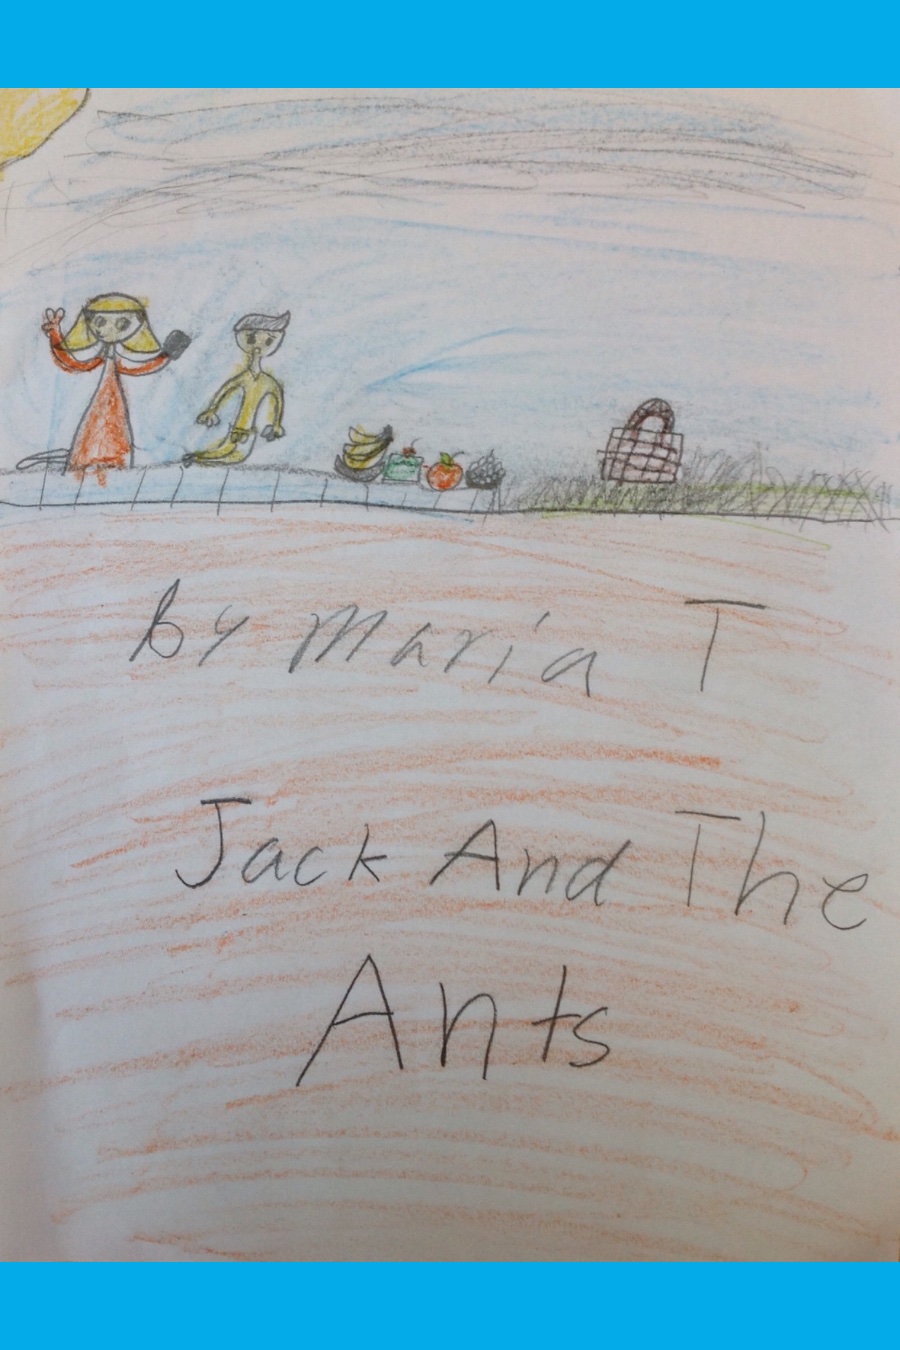 Jack and the Ants by Maria T